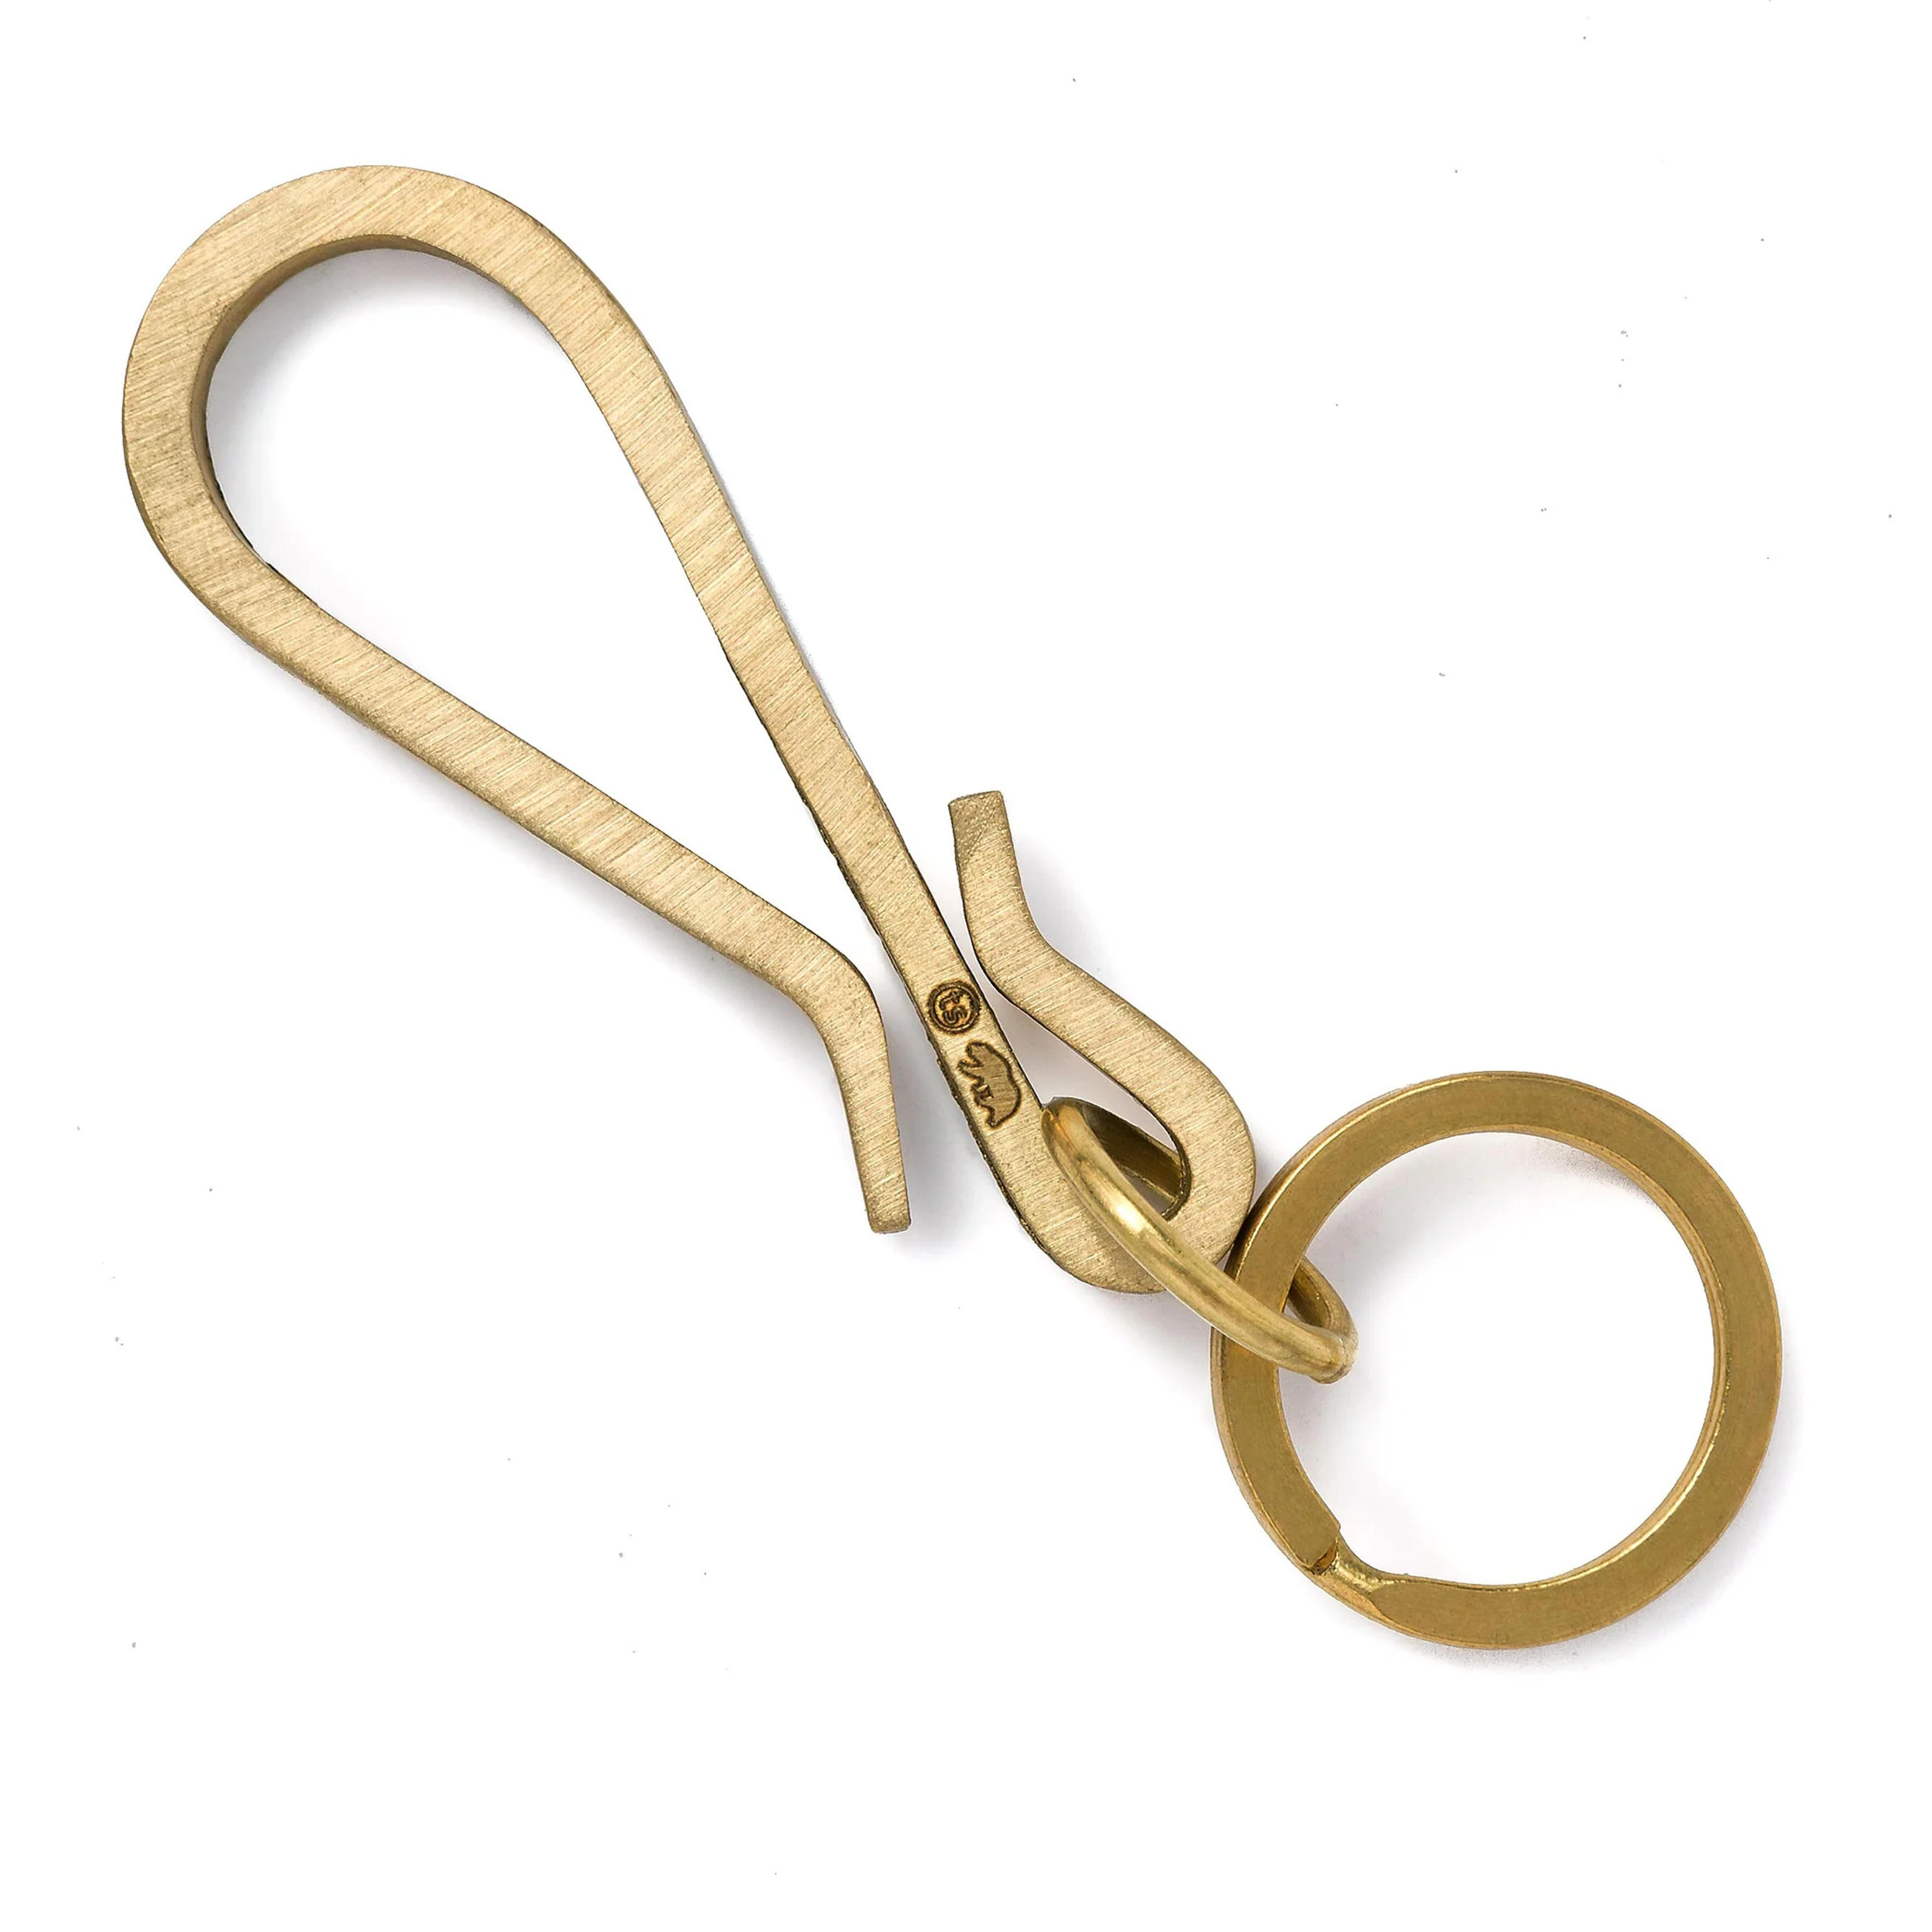 The Keyhook in Raw Brass | $32